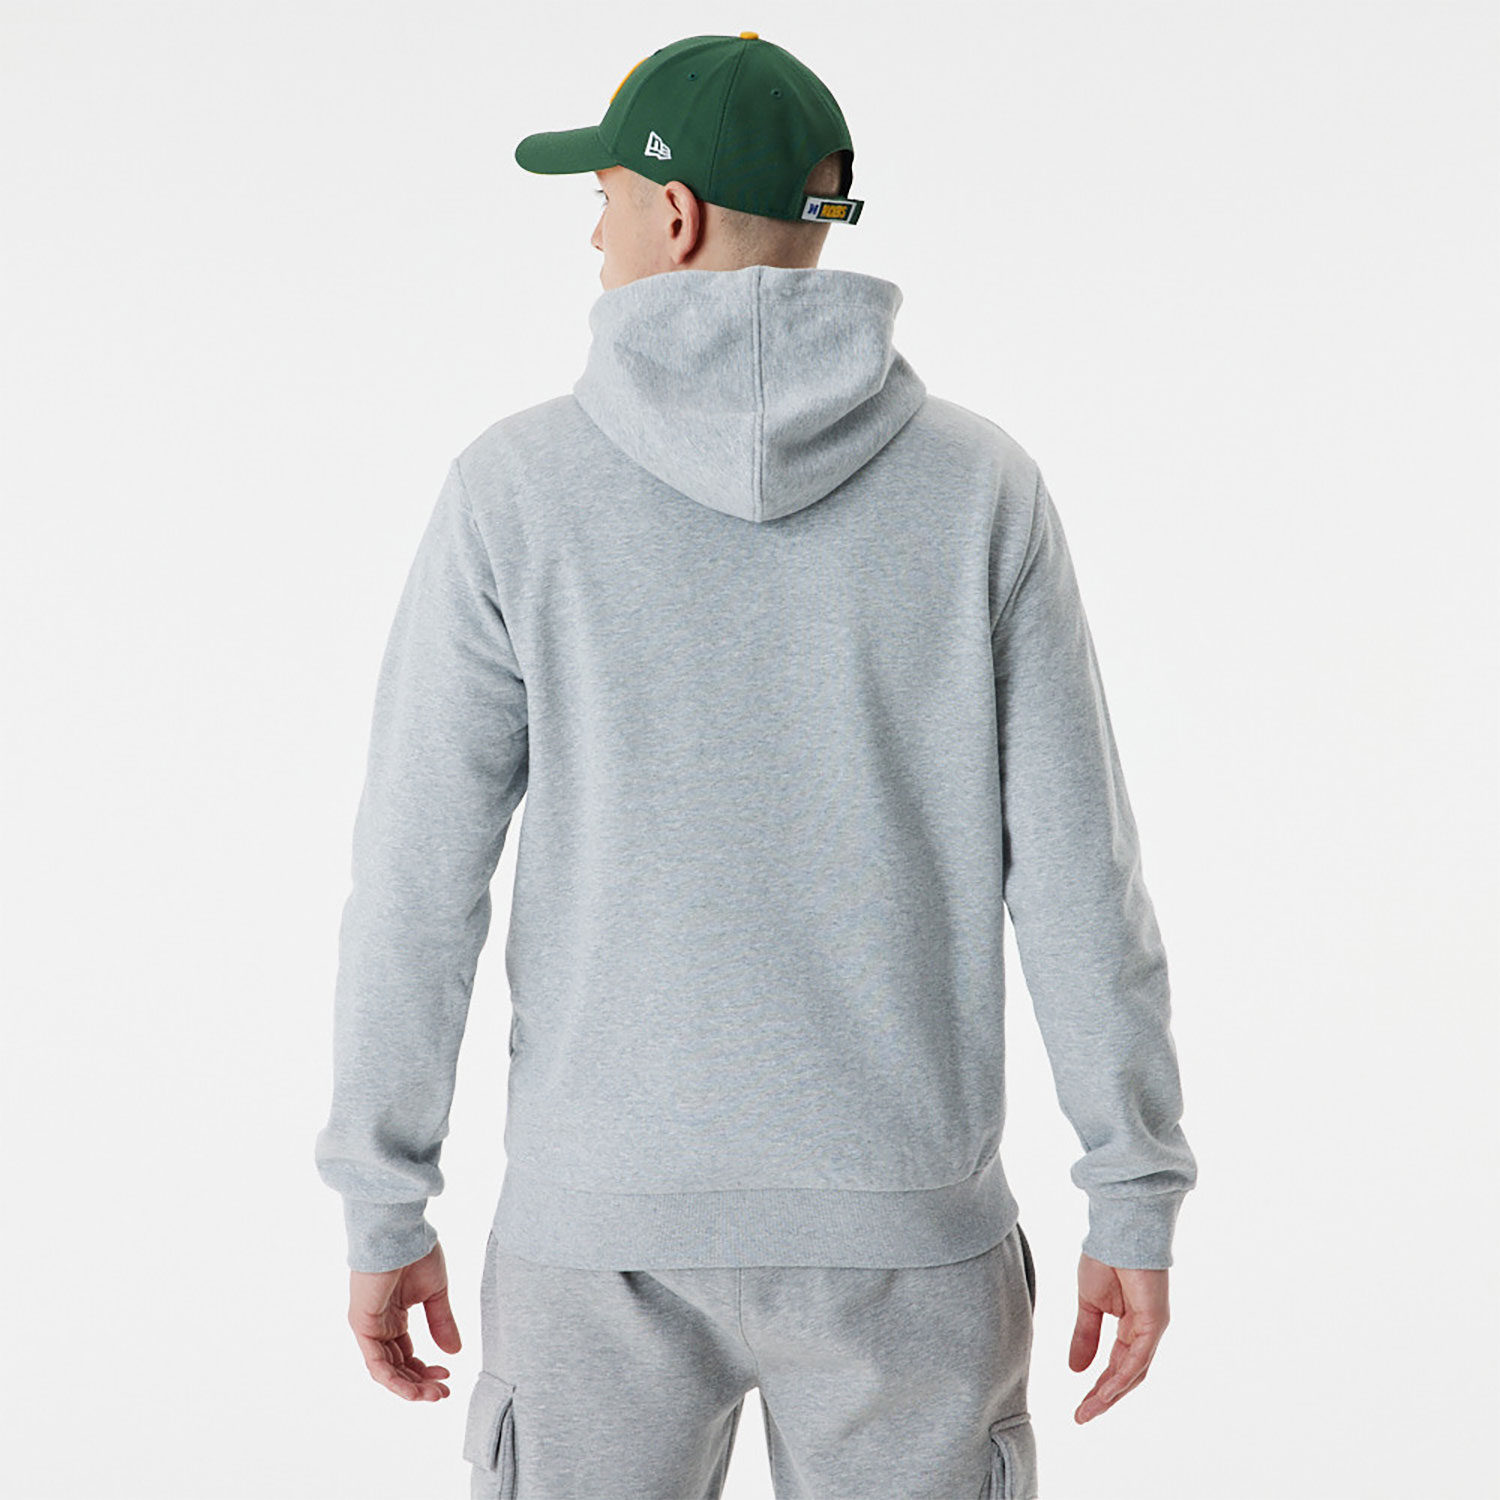 Green Bay Packers NFL Team Graphic Grey Pullover Hoodie